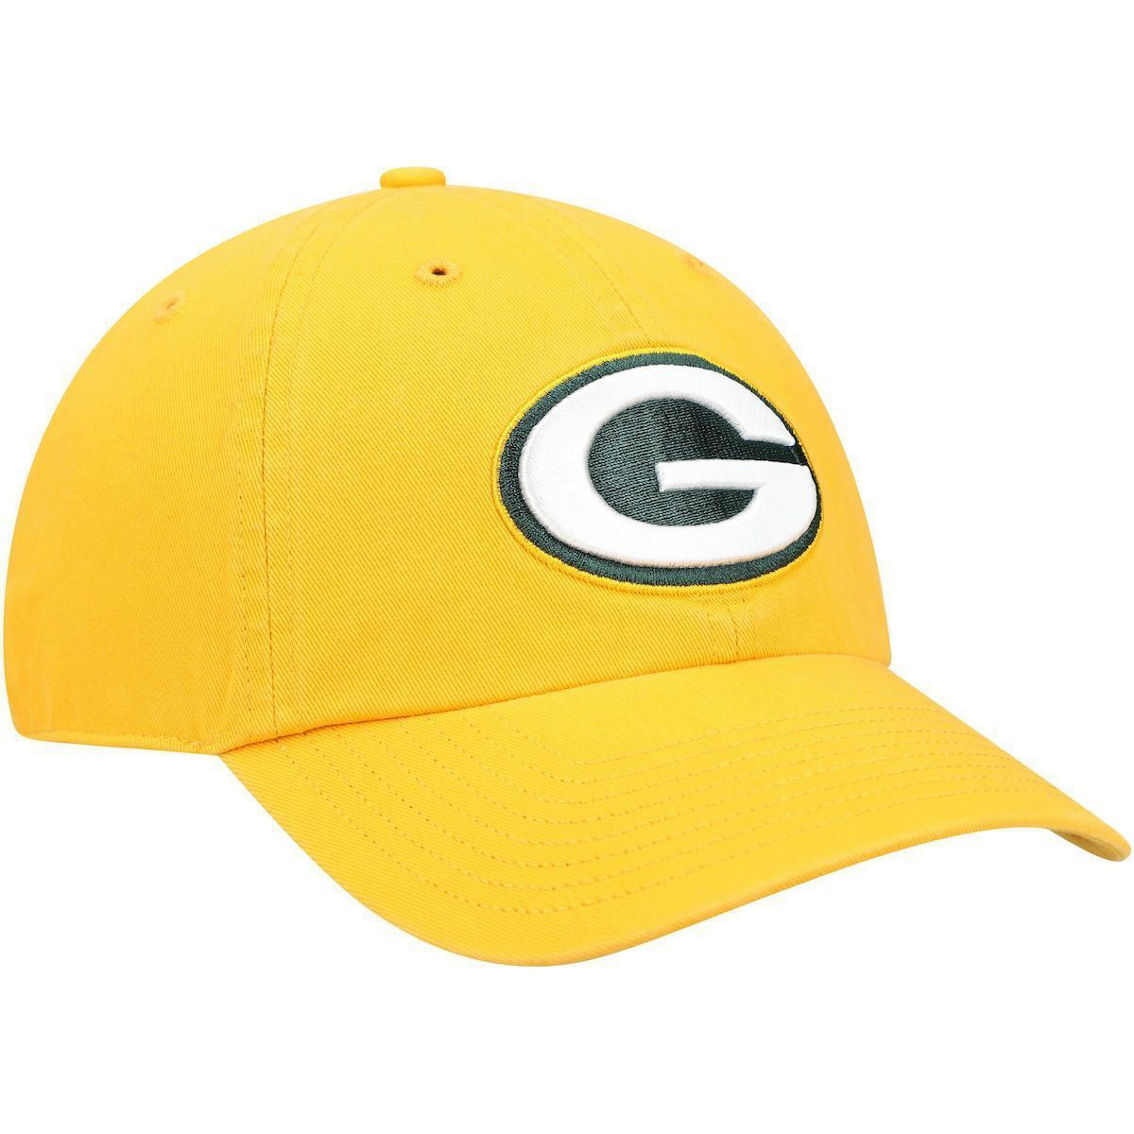 '47 Men's Gold Green Bay Packers Secondary Clean Up Adjustable Hat - Image 4 of 4